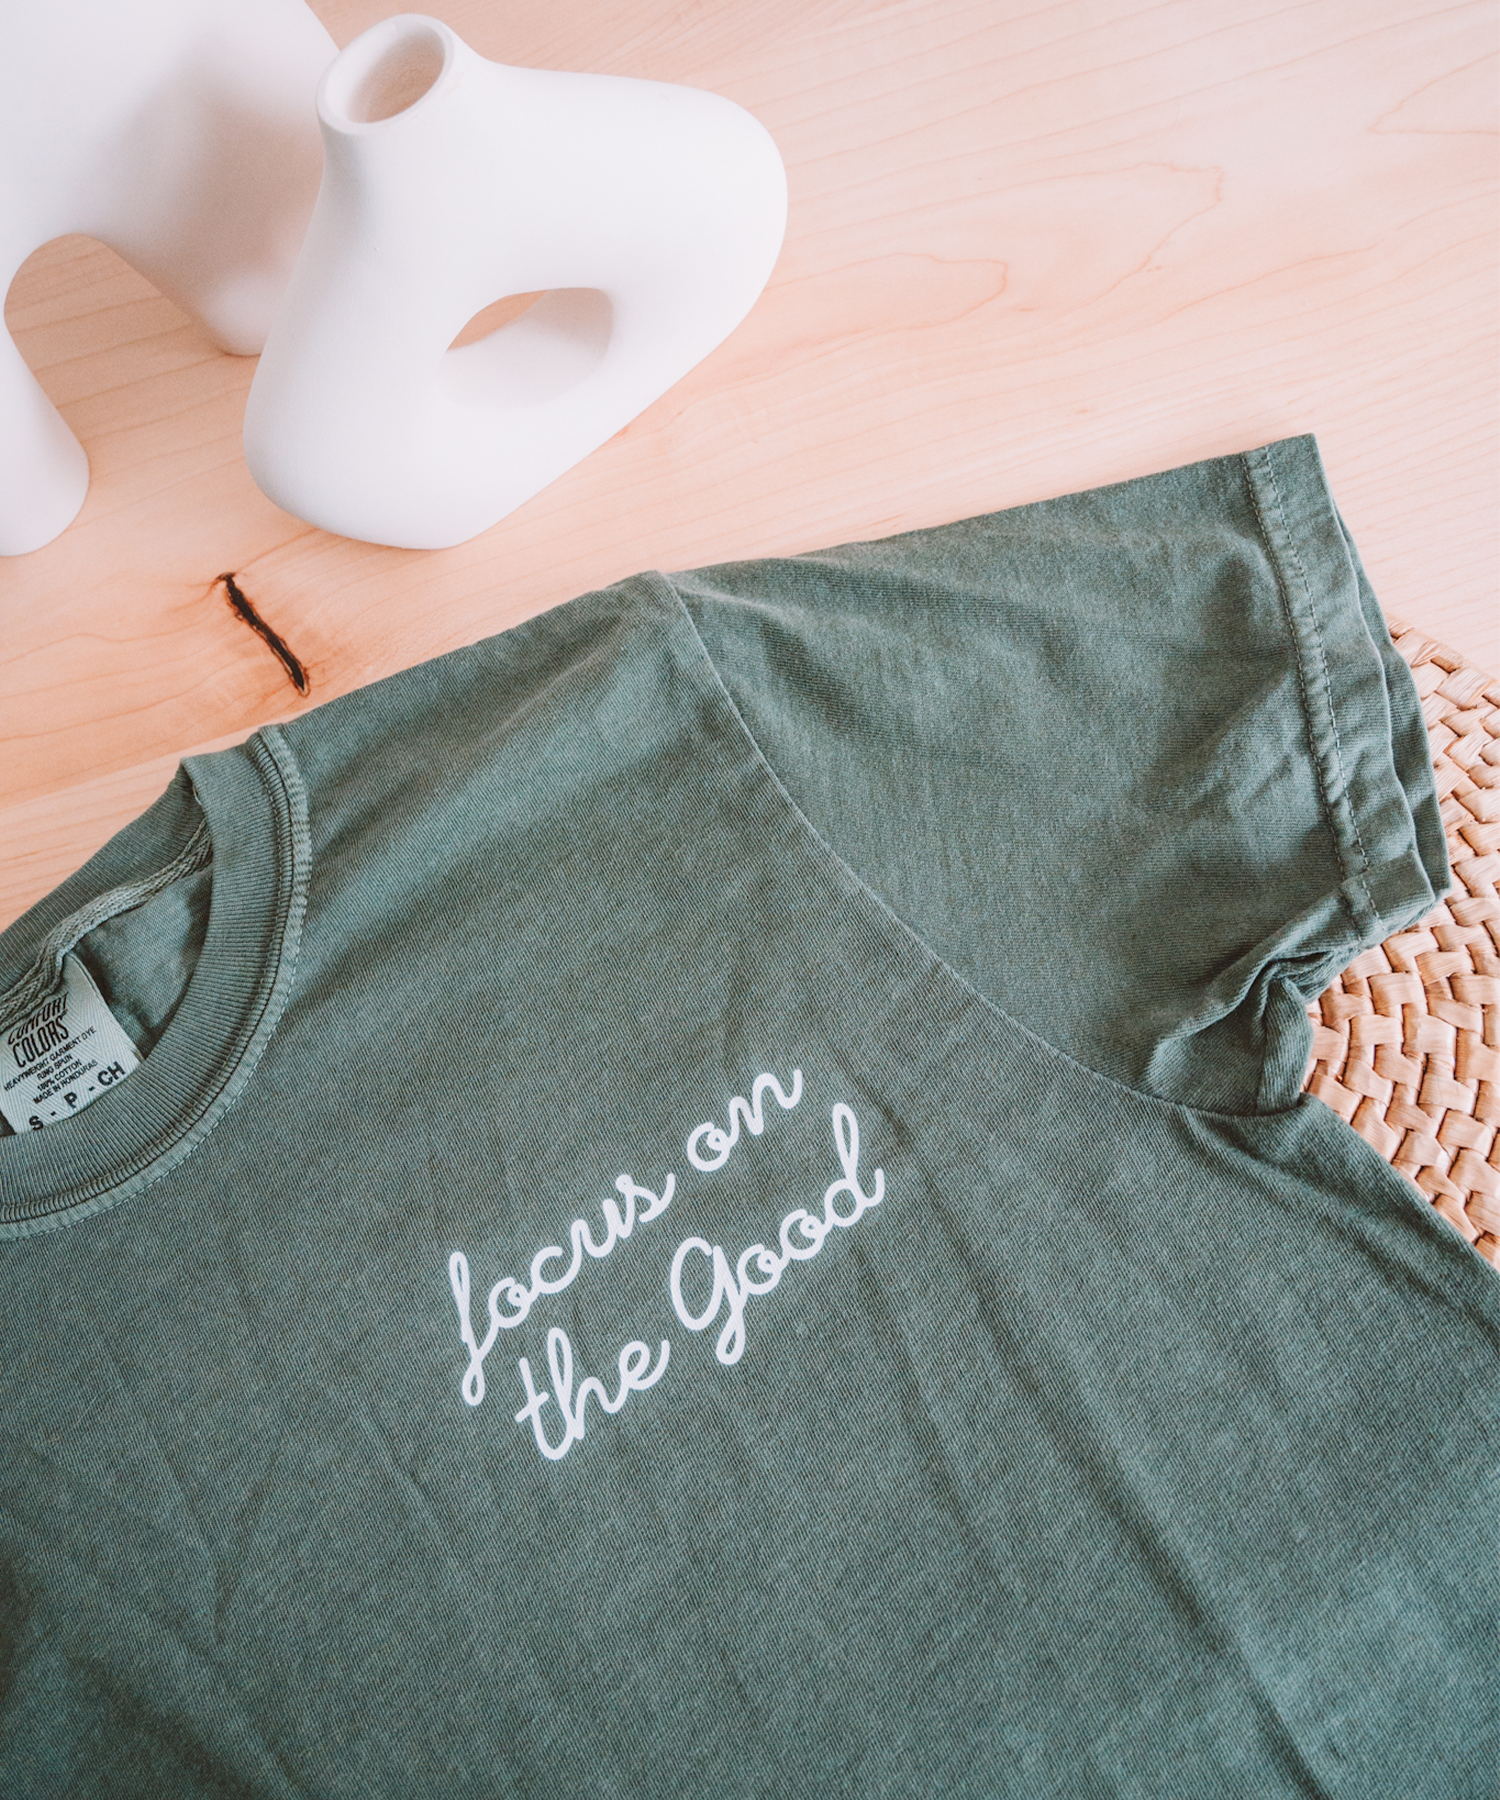 The "Focus on the Good" t-shirt in moss is laying on a desk with two asymmetrical vases in the background.